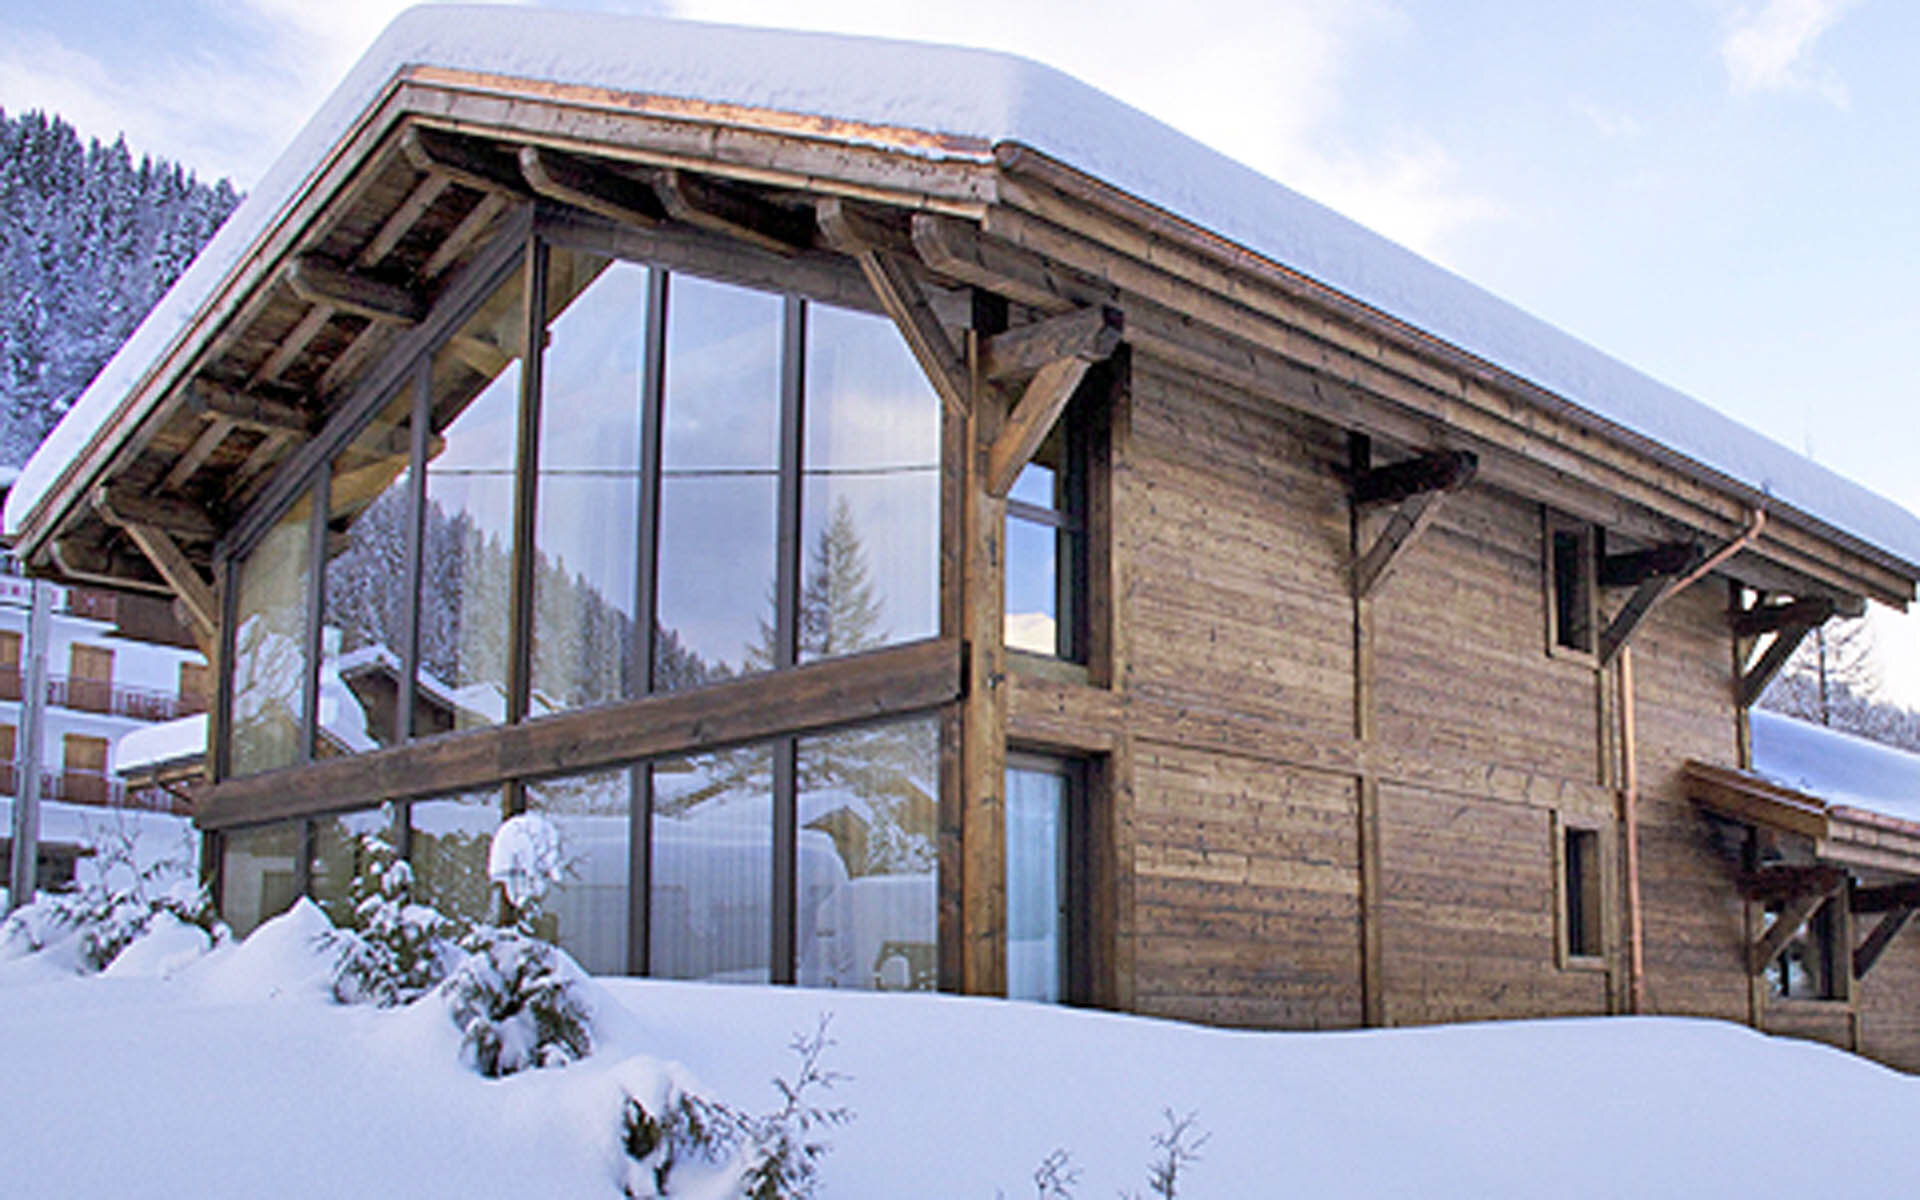 Chalet de Glace - French mountain chalet for a wonderful holiday (2)